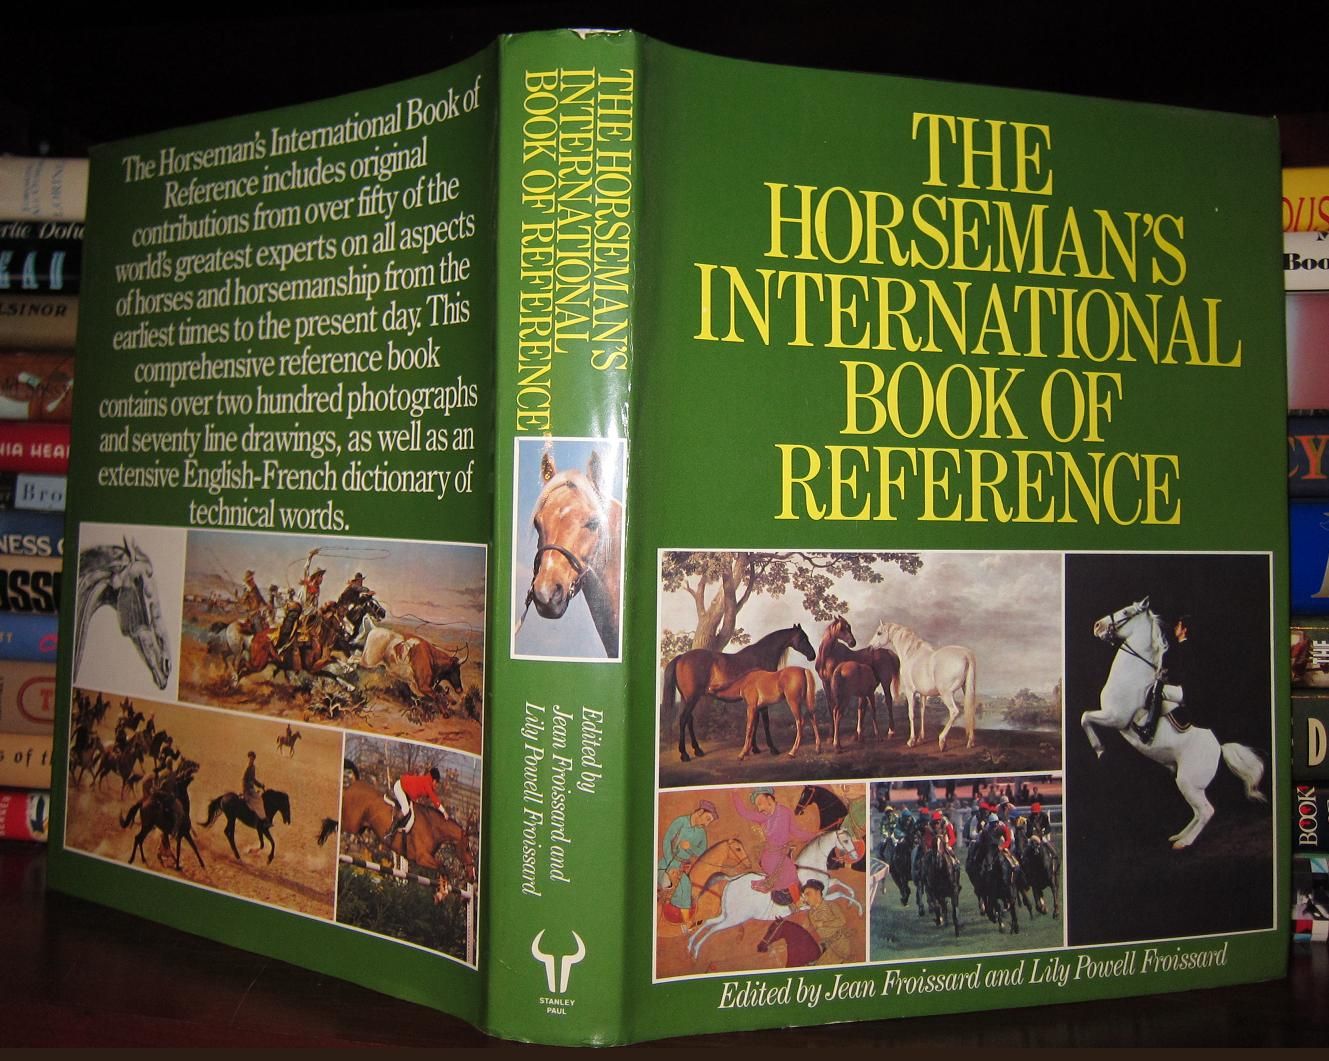 FROISSARD, JEAN & LILY POWELL FROISSARD & LILY POWELL-FROISSARD - The Horseman's International Book of Reference